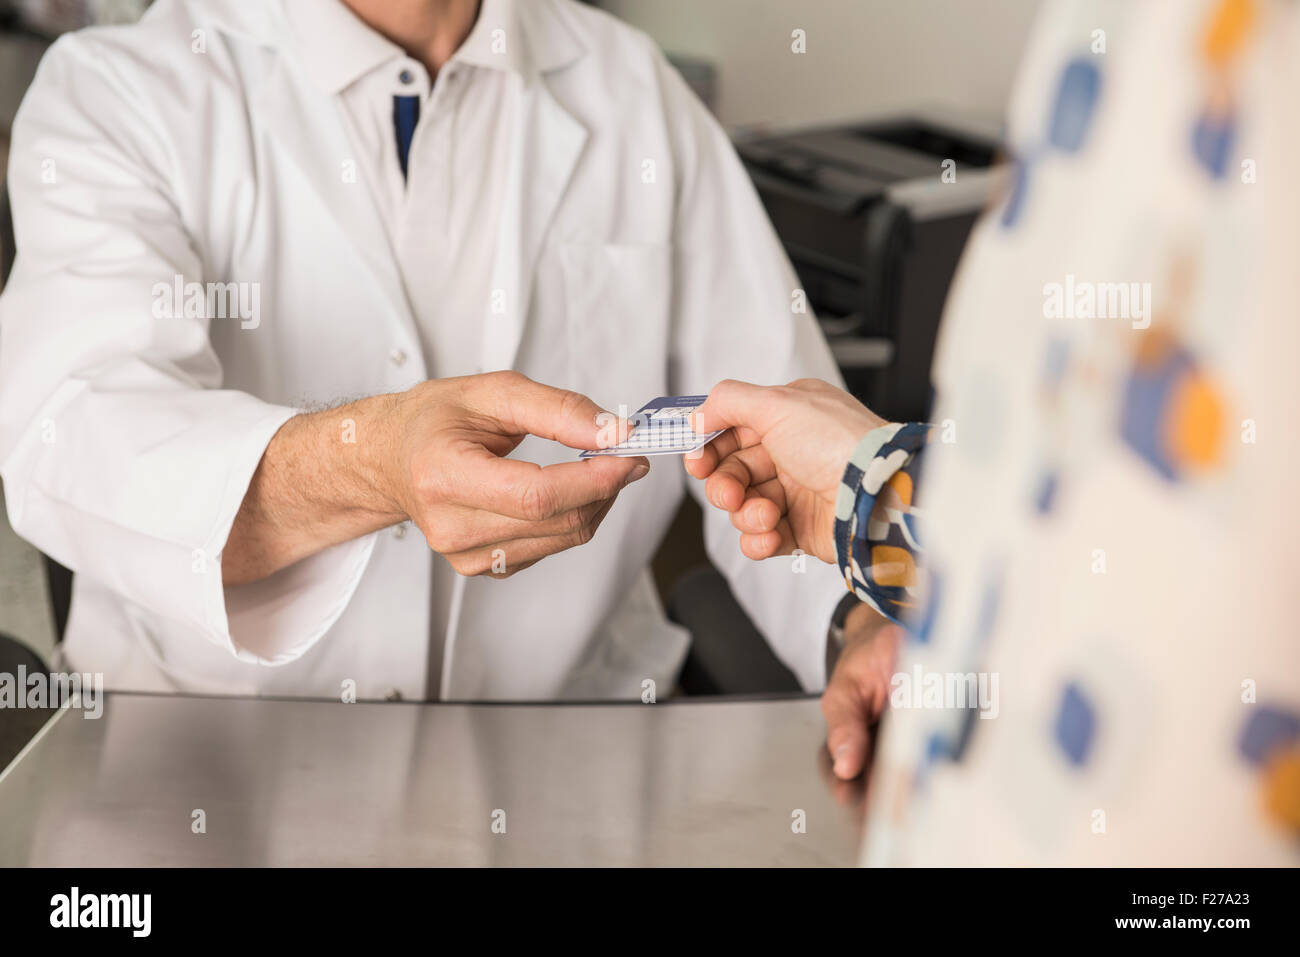 Patient giving a health insurance card to doctor, Munich, Bavaria, Germany Stock Photo